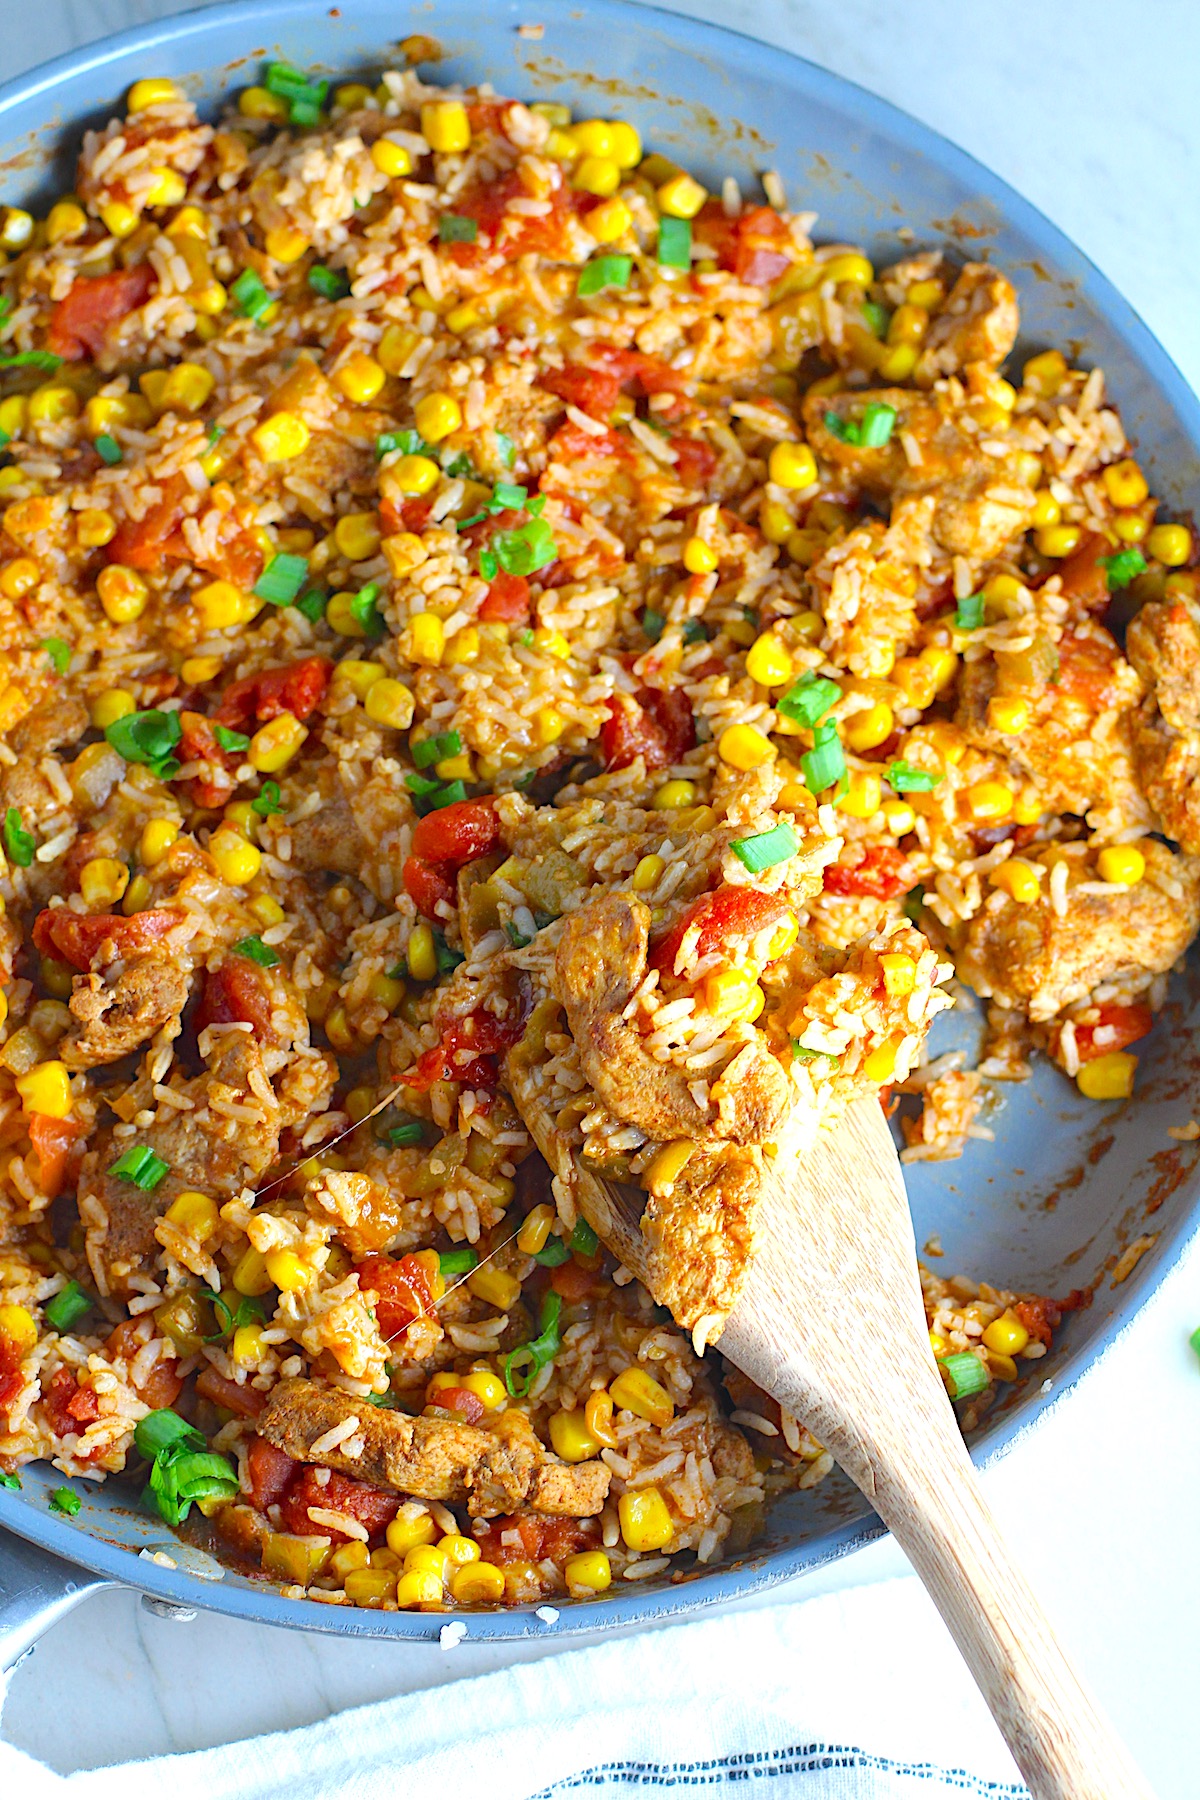 Mexican Marinated Chicken and Rice Skillet with tomatoes, corn, and scallions. Spatula scooping inside the skillet.